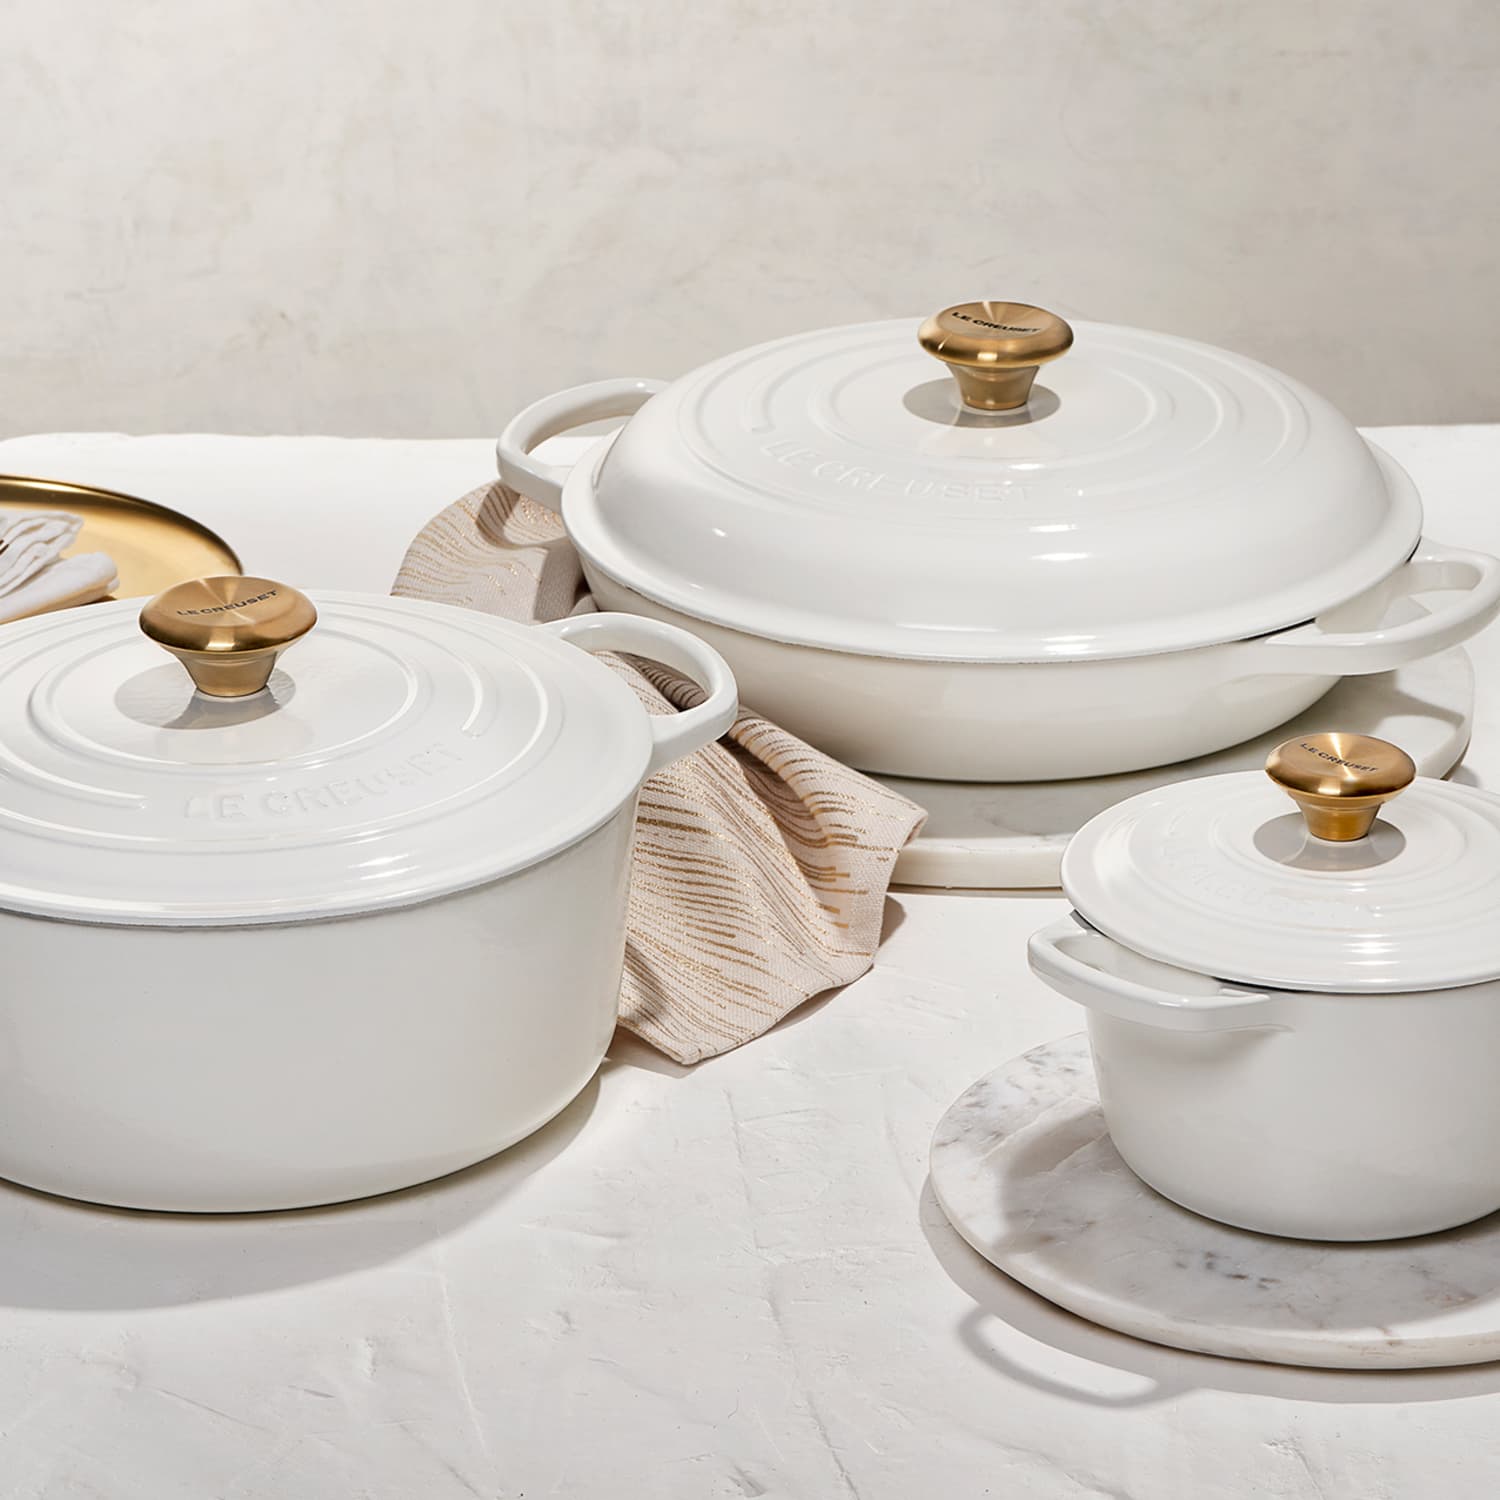 Le Creuset - Introducing the Gold Knob collection, available exclusively at Le  Creuset Signature Boutiques and at lecreuset.com